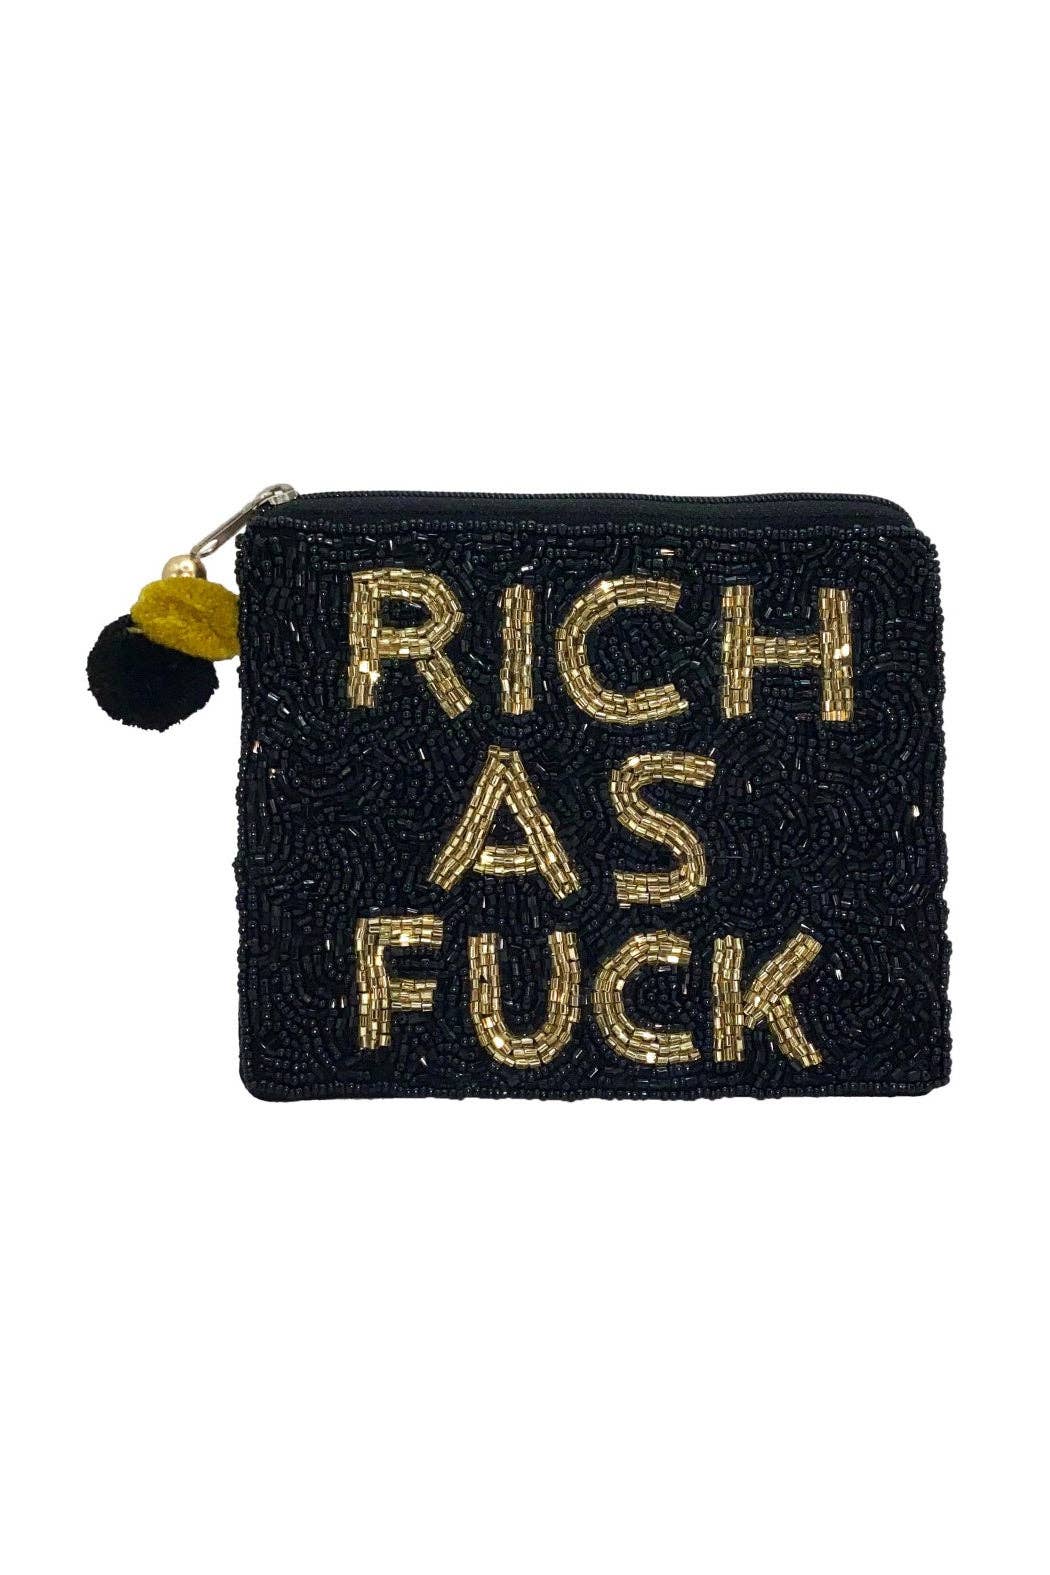 Embellish Your Life - RICH AF Beaded Pouch Bag